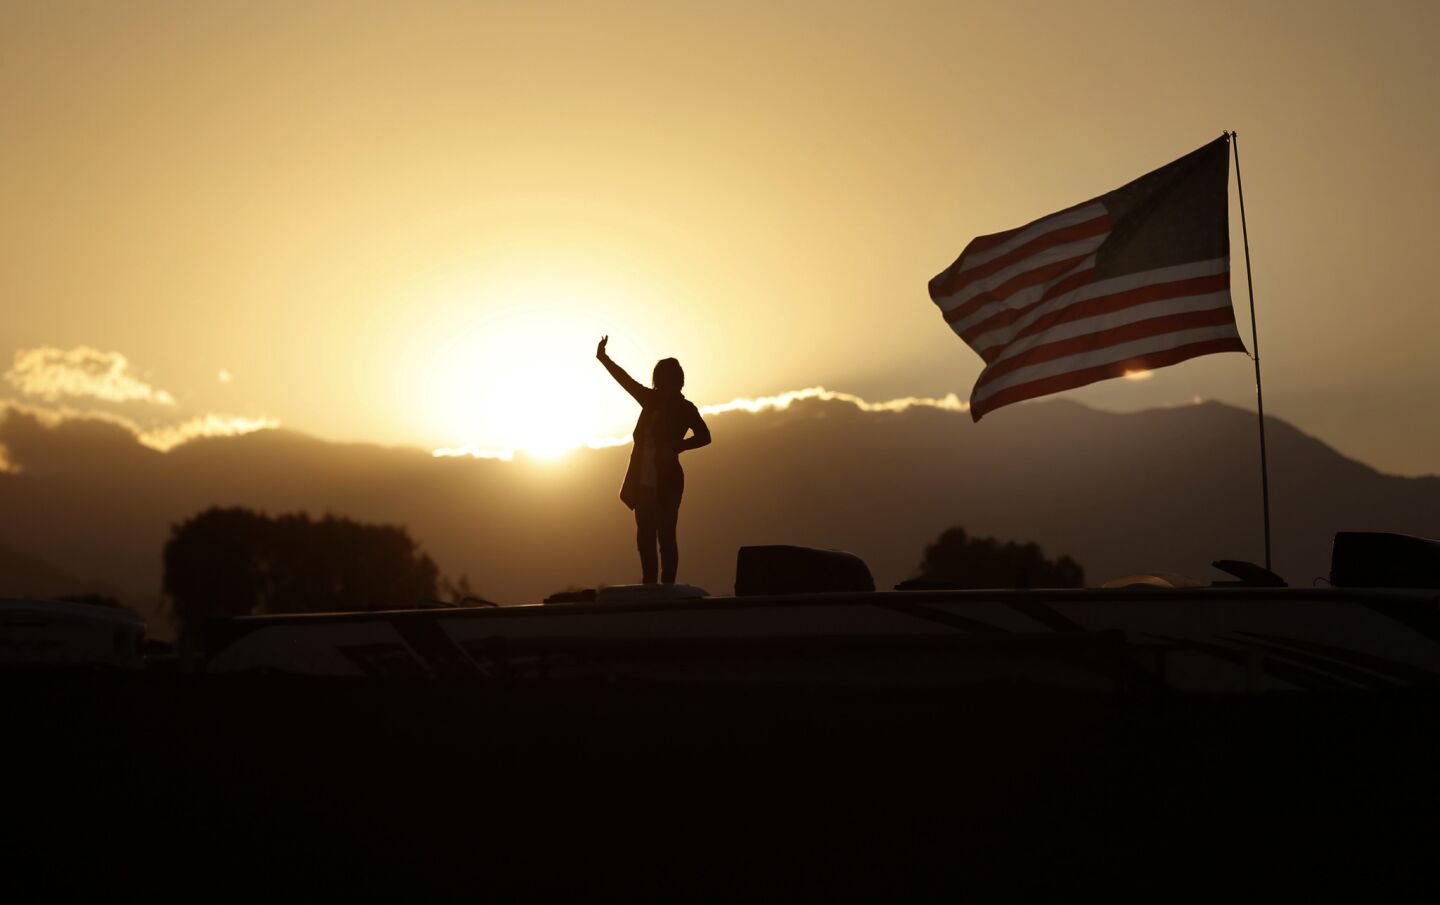 A country music fan waves to friends from the top of an RV at sunset in the RV Resort as she attends the 10th anniversary of Stagecoach Country Music Festival at the Empire Polo Club in Indio on Thursday.